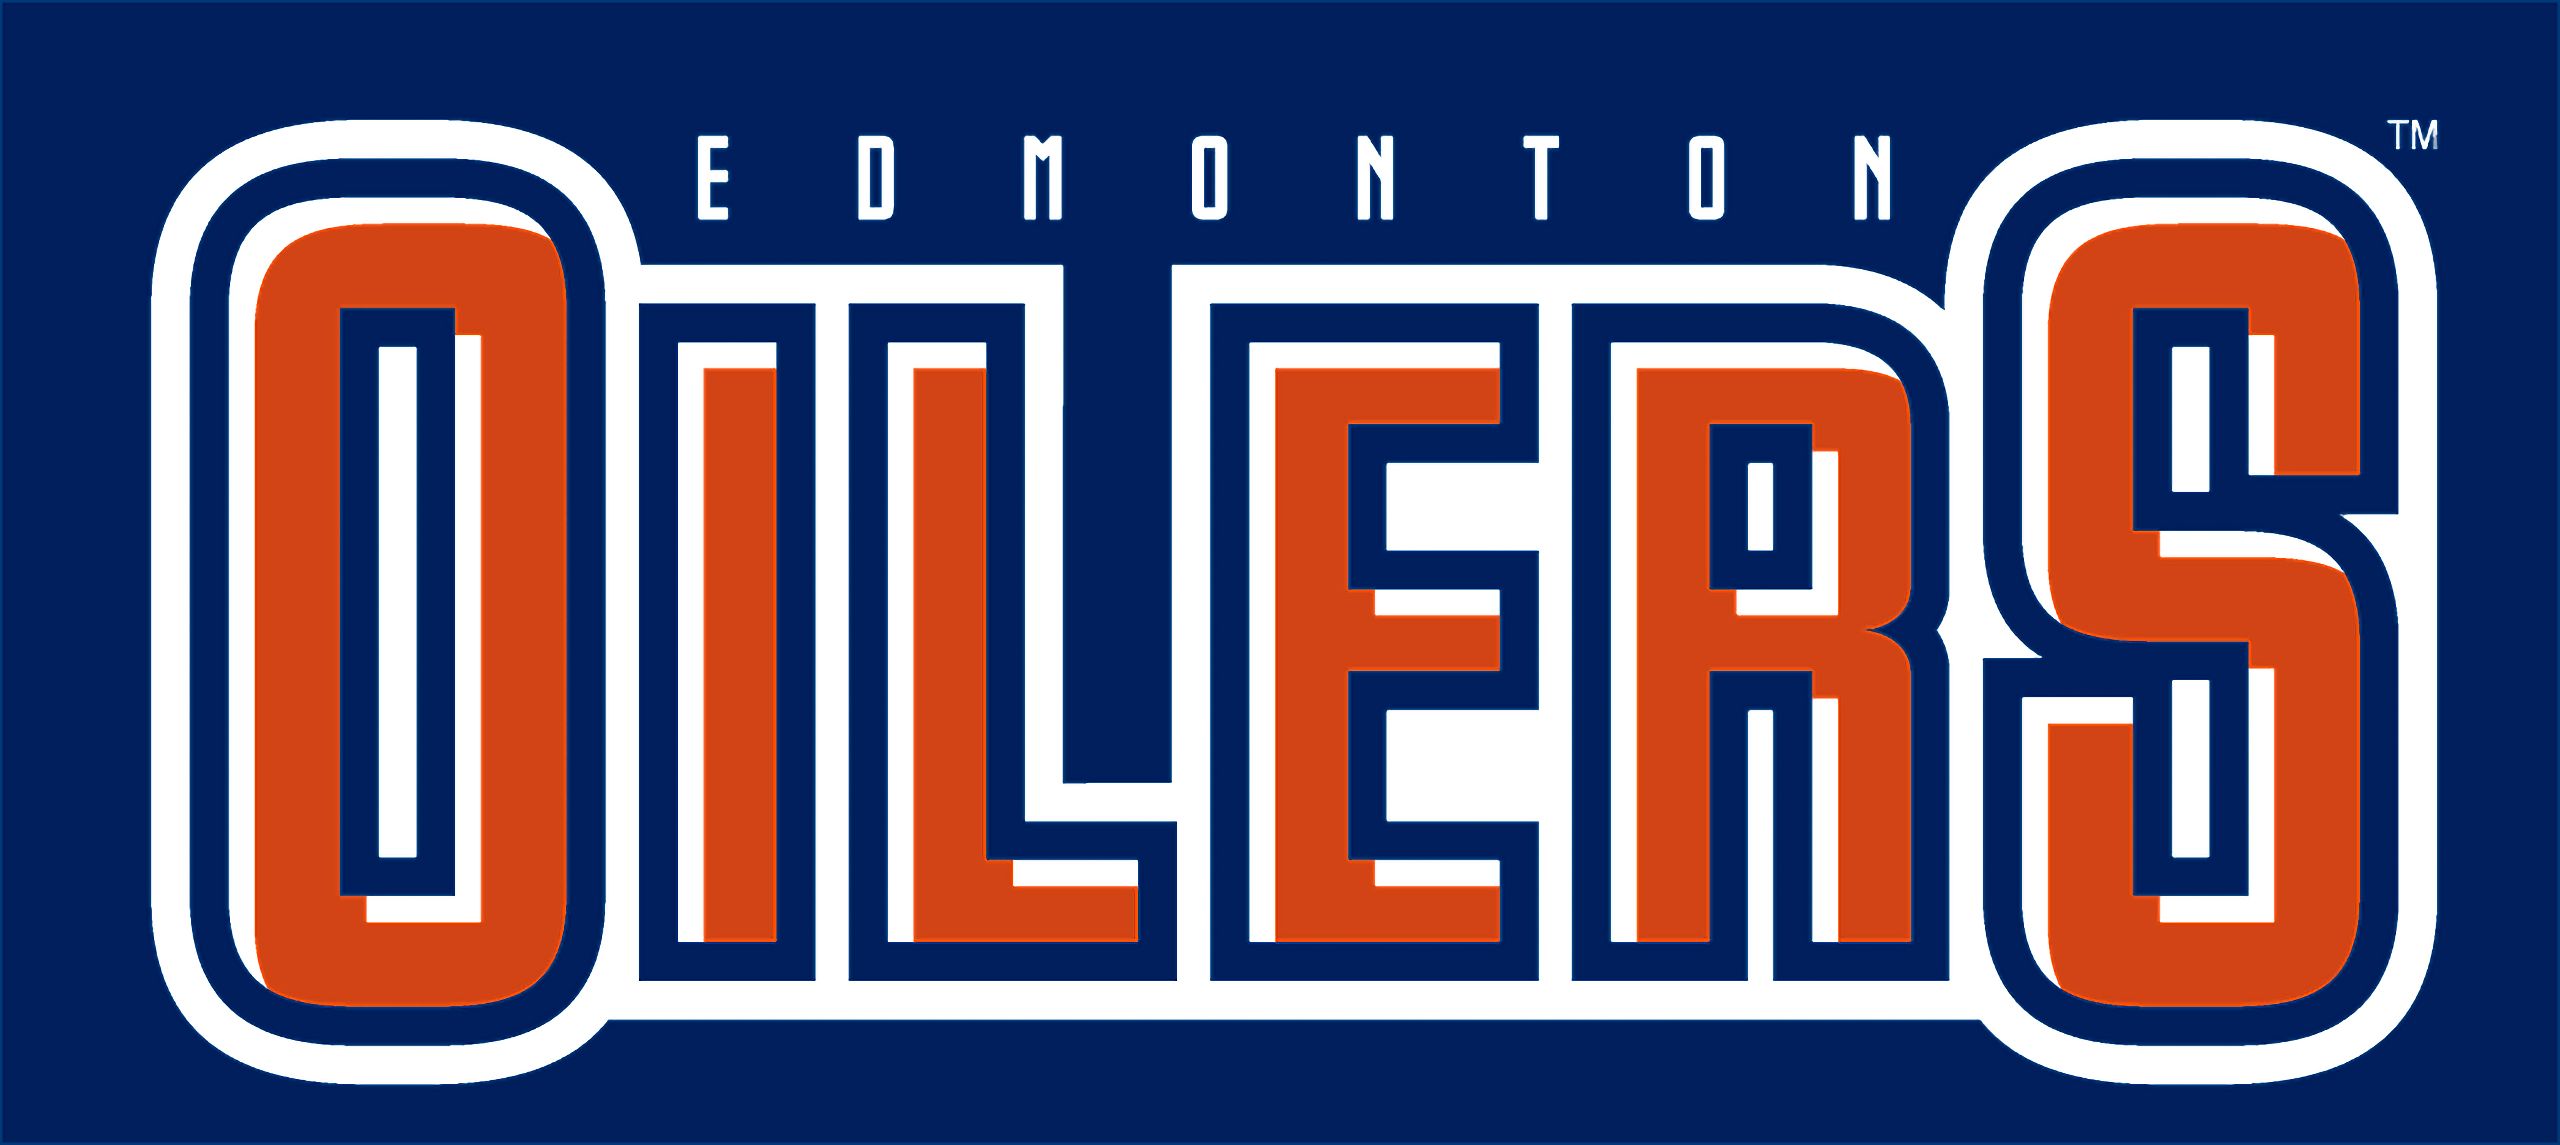 Download wallpapers 4k Edmonton Oilers logo hockey club NHL black  stone Western Conference USA Asphalt texture hockey Pacific Division  for desktop fre  Edmonton oilers Oilers Nhl